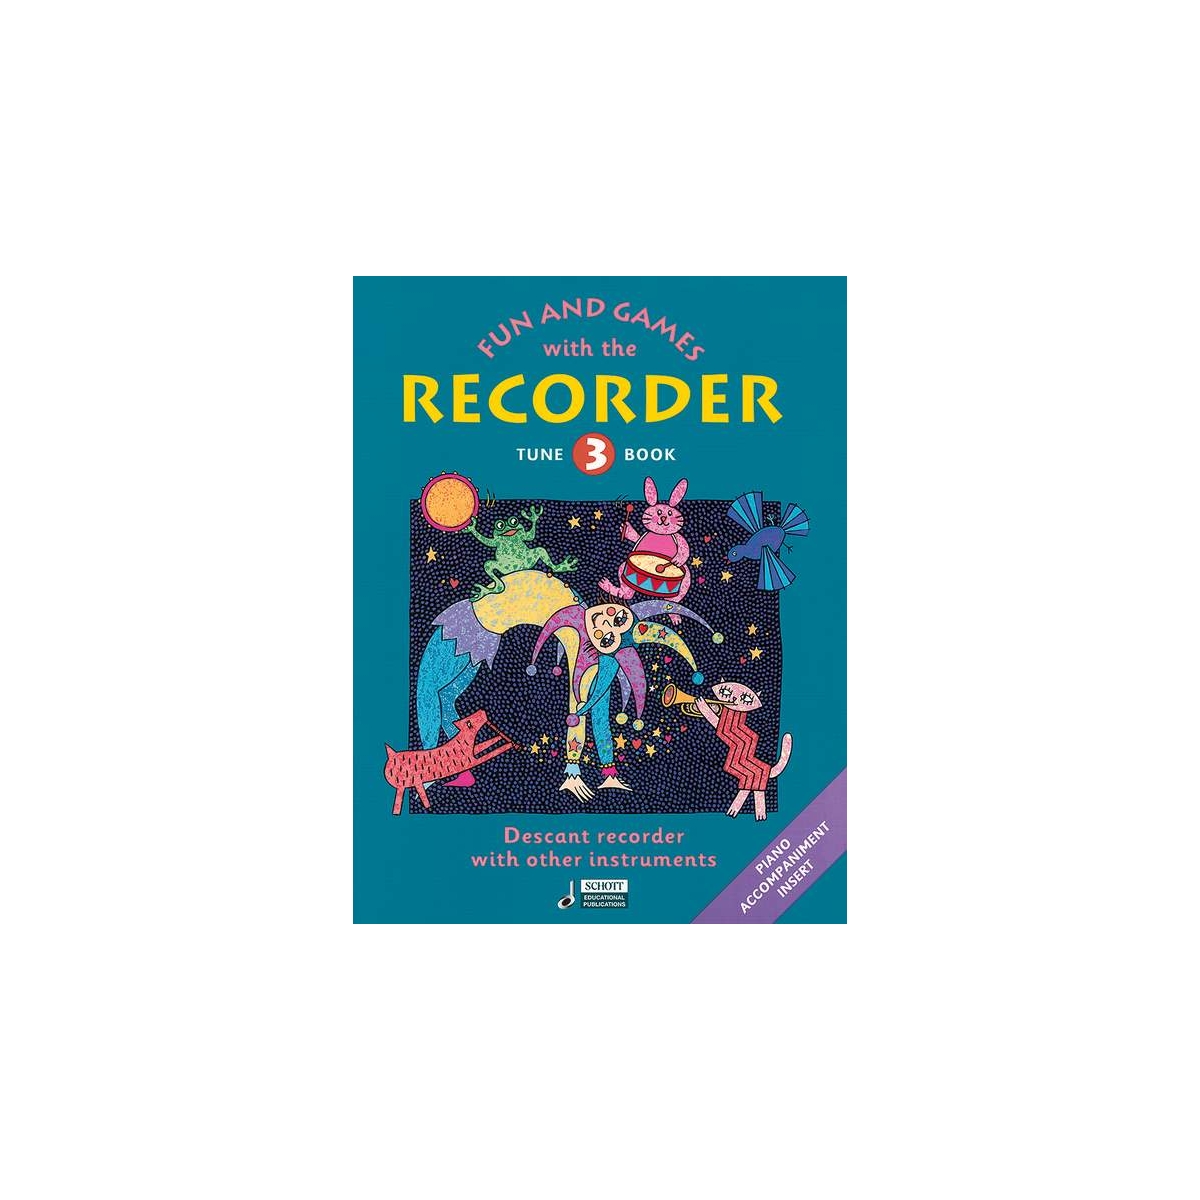 Fun and Games with the Recorder Tune Book 3 [Descant Recorder]